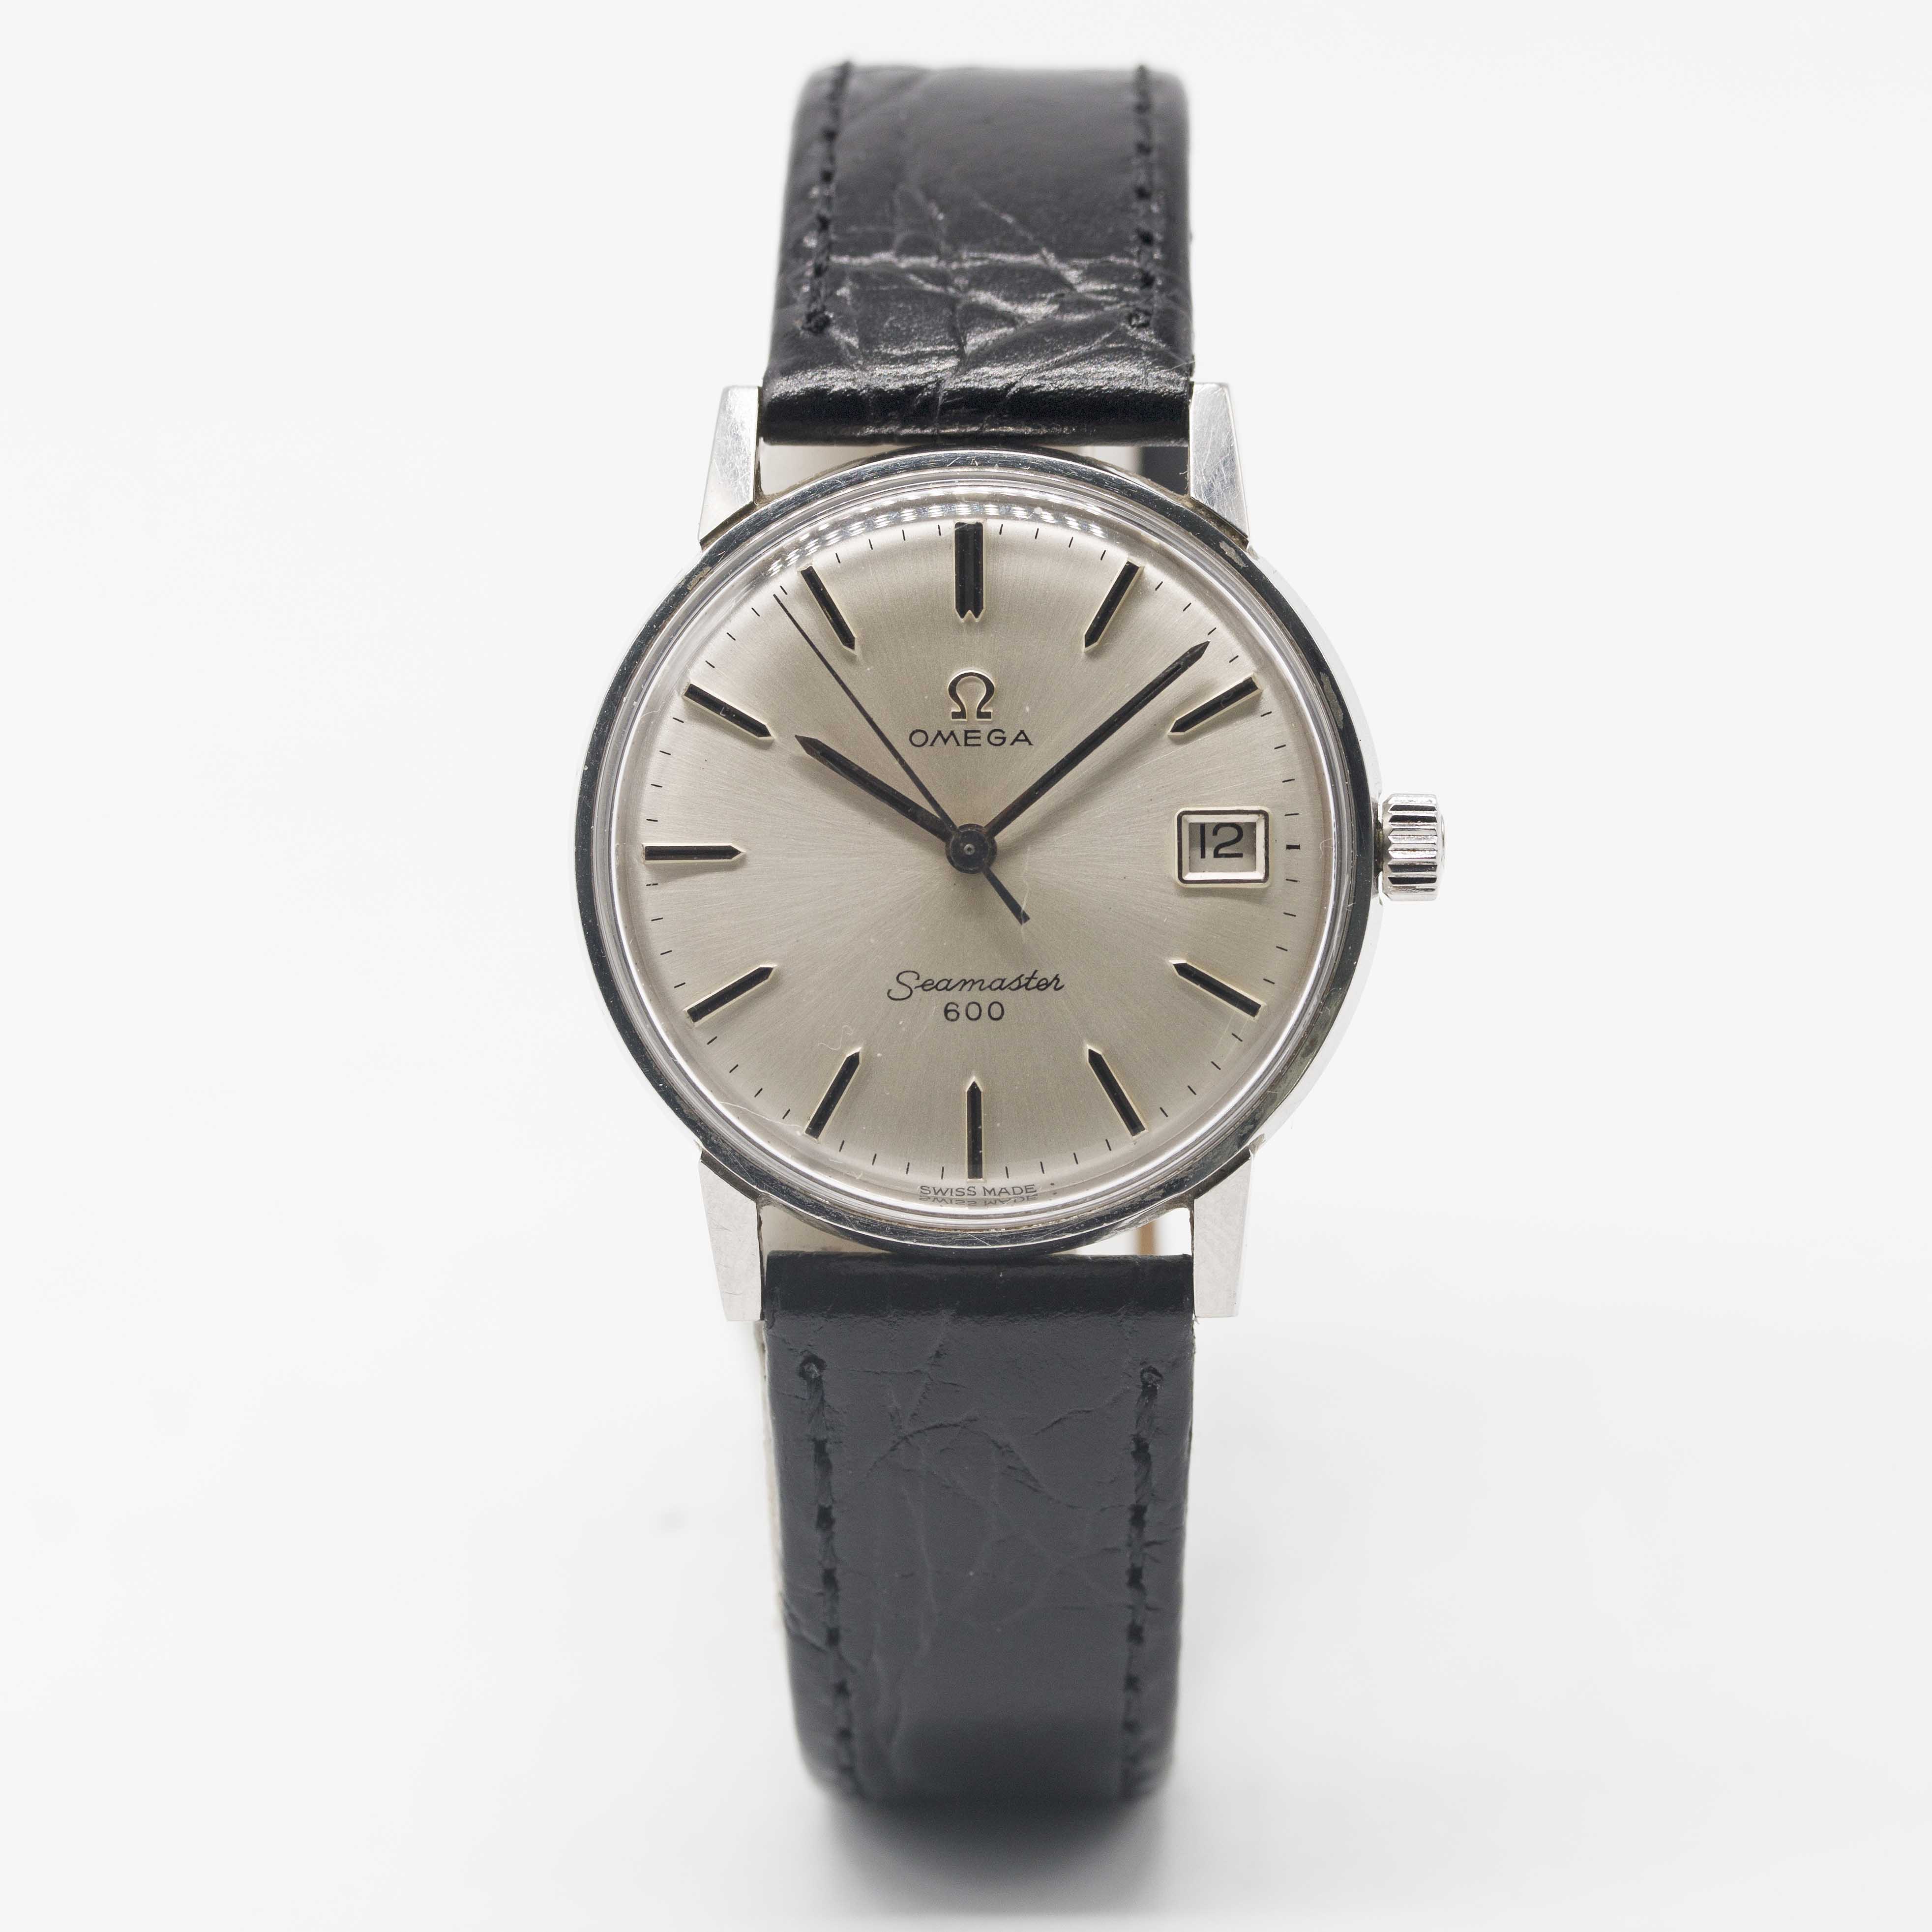 A GENTLEMAN'S STAINLESS STEEL OMEGA SEAMASTER 600 DATE WRIST WATCH CIRCA 1965, REF. 136.011 - Image 2 of 6